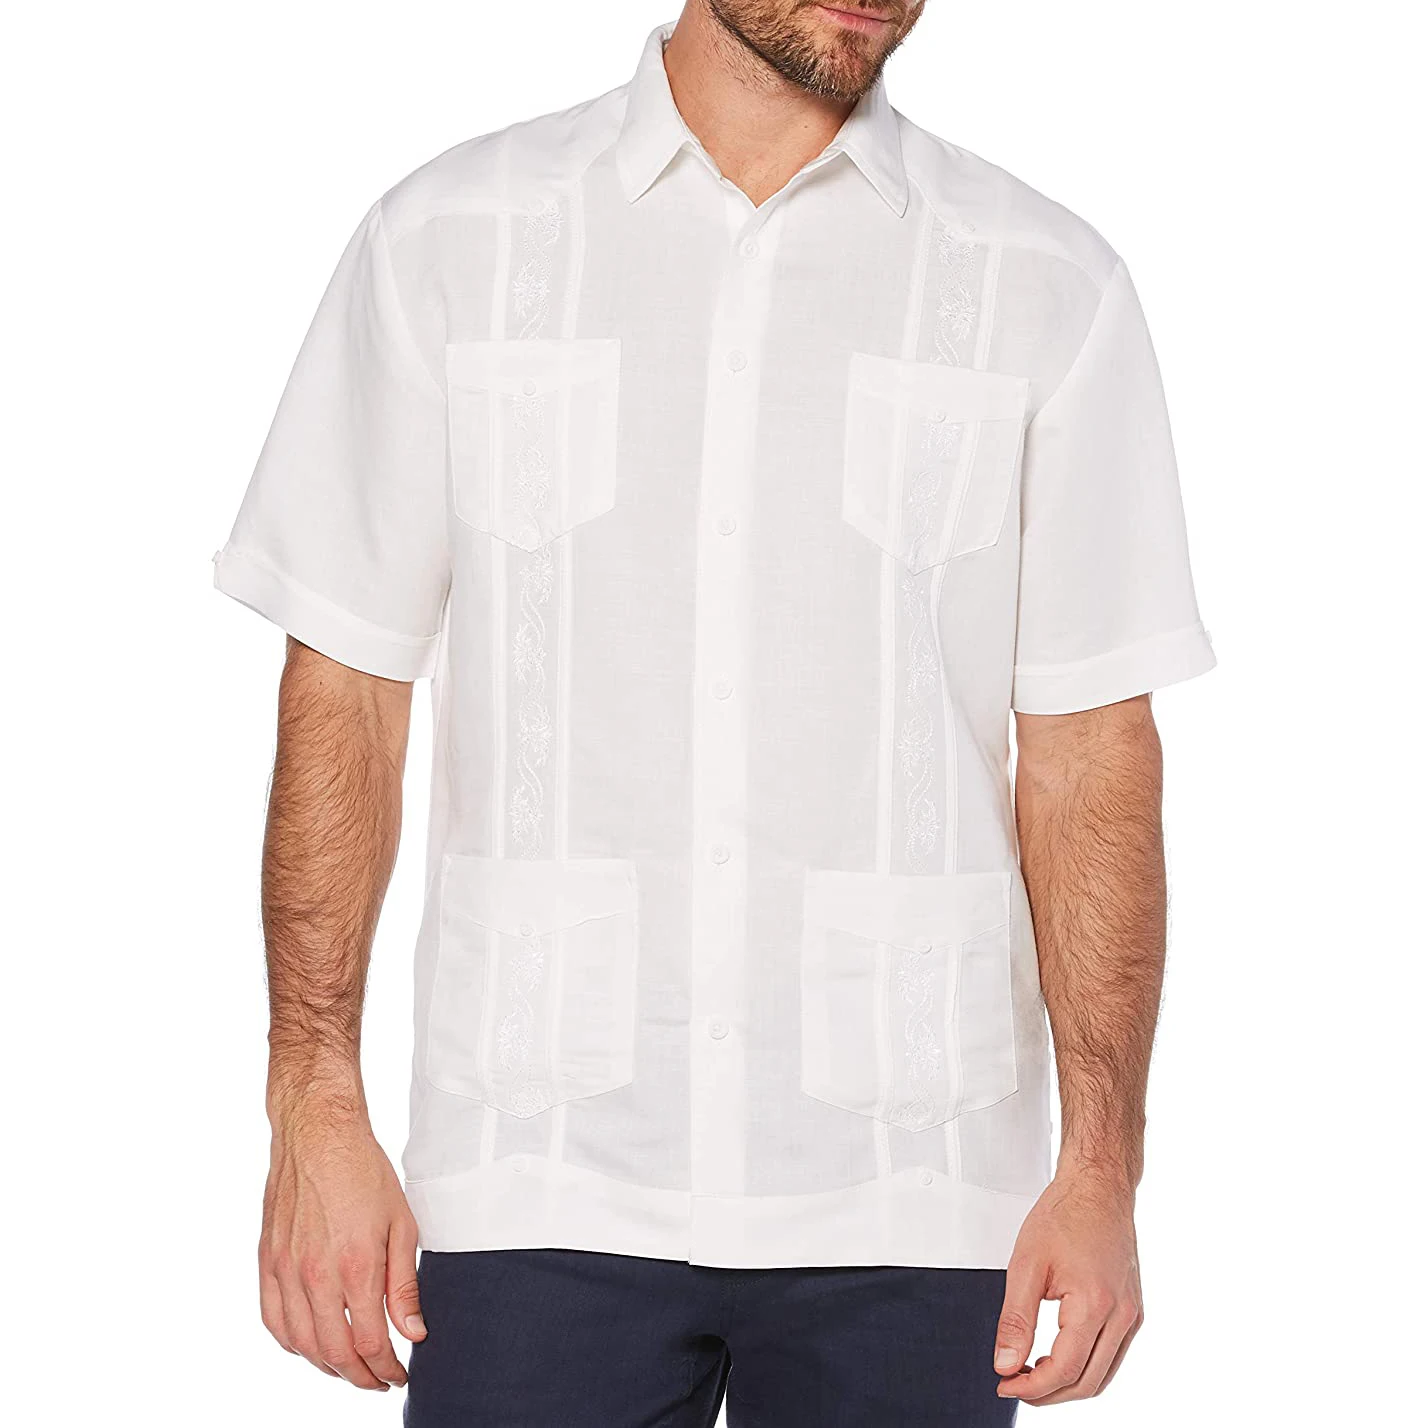 High Grade Cotton Polyester Guayabera Style Embroidered Short Sleeve ...